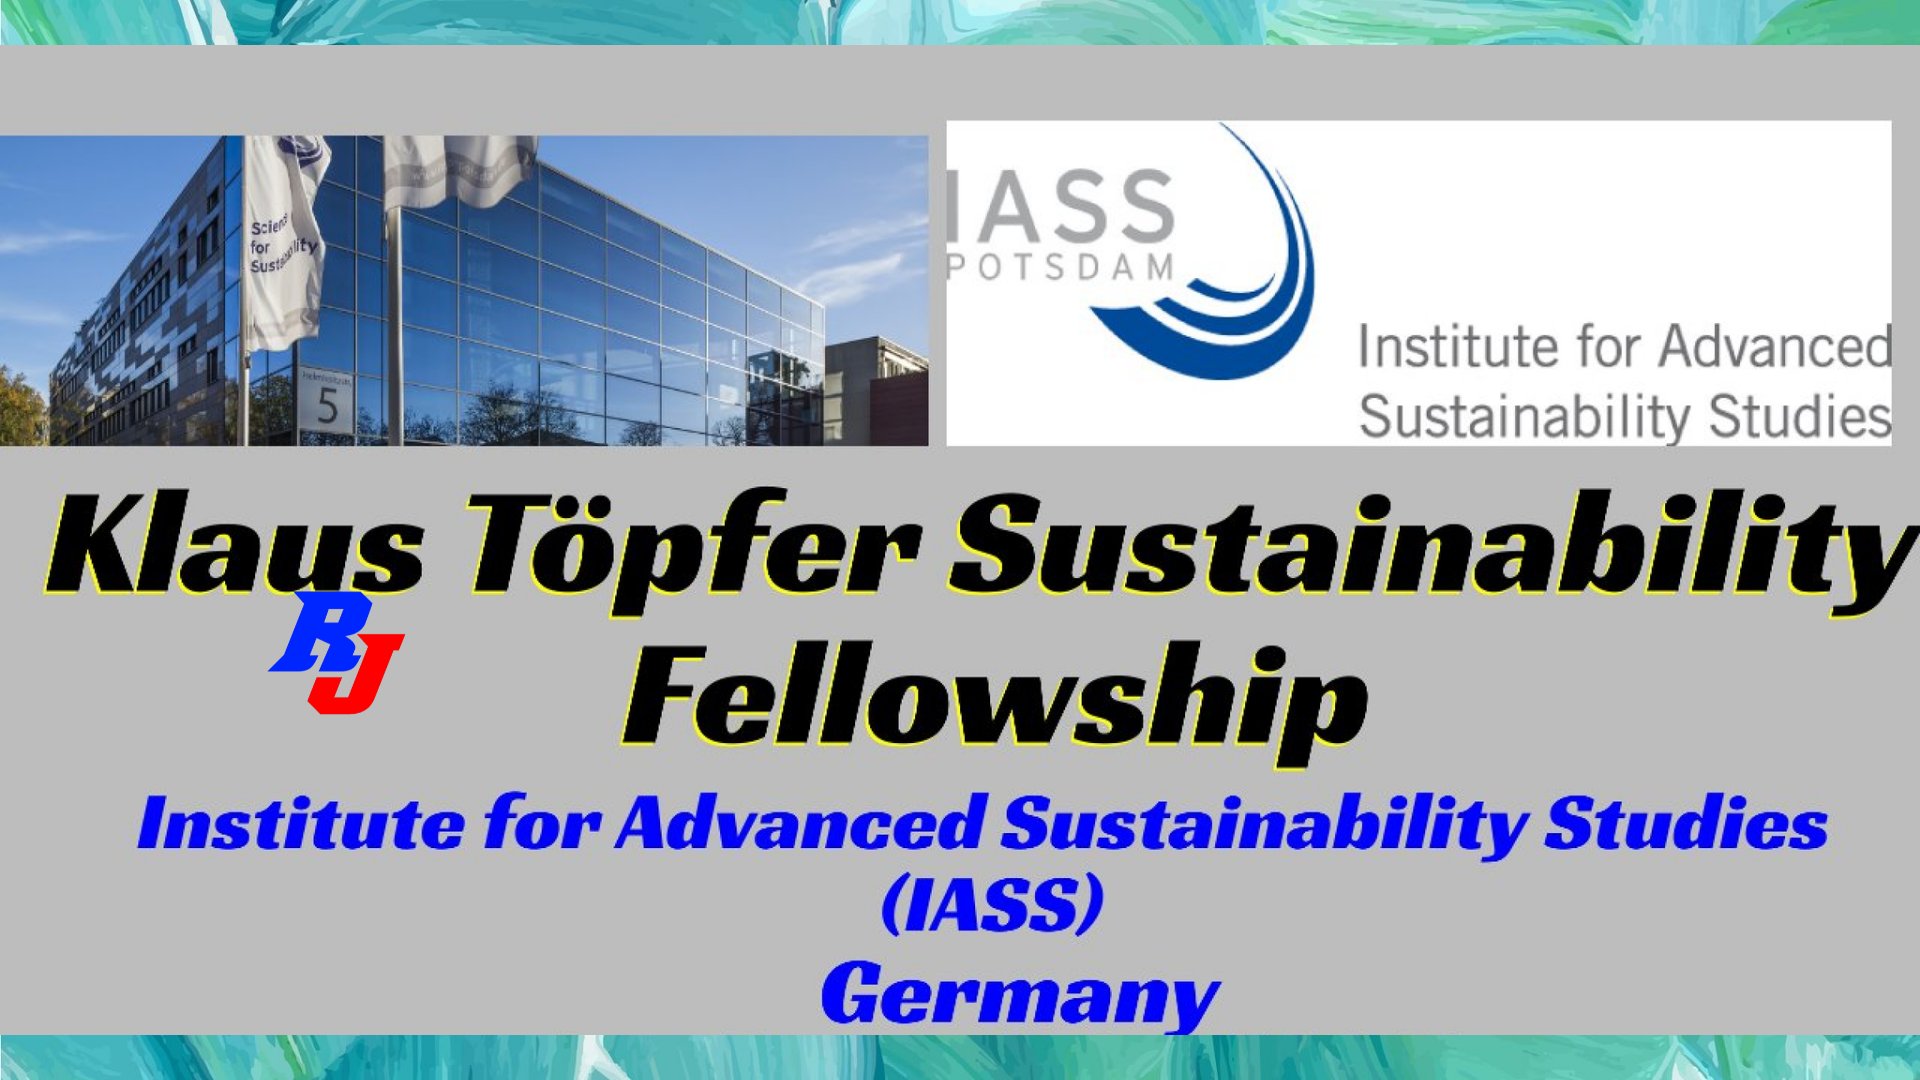 IASS Call – Klaus Töpfer Sustainability Fellowship 2021 in Germany